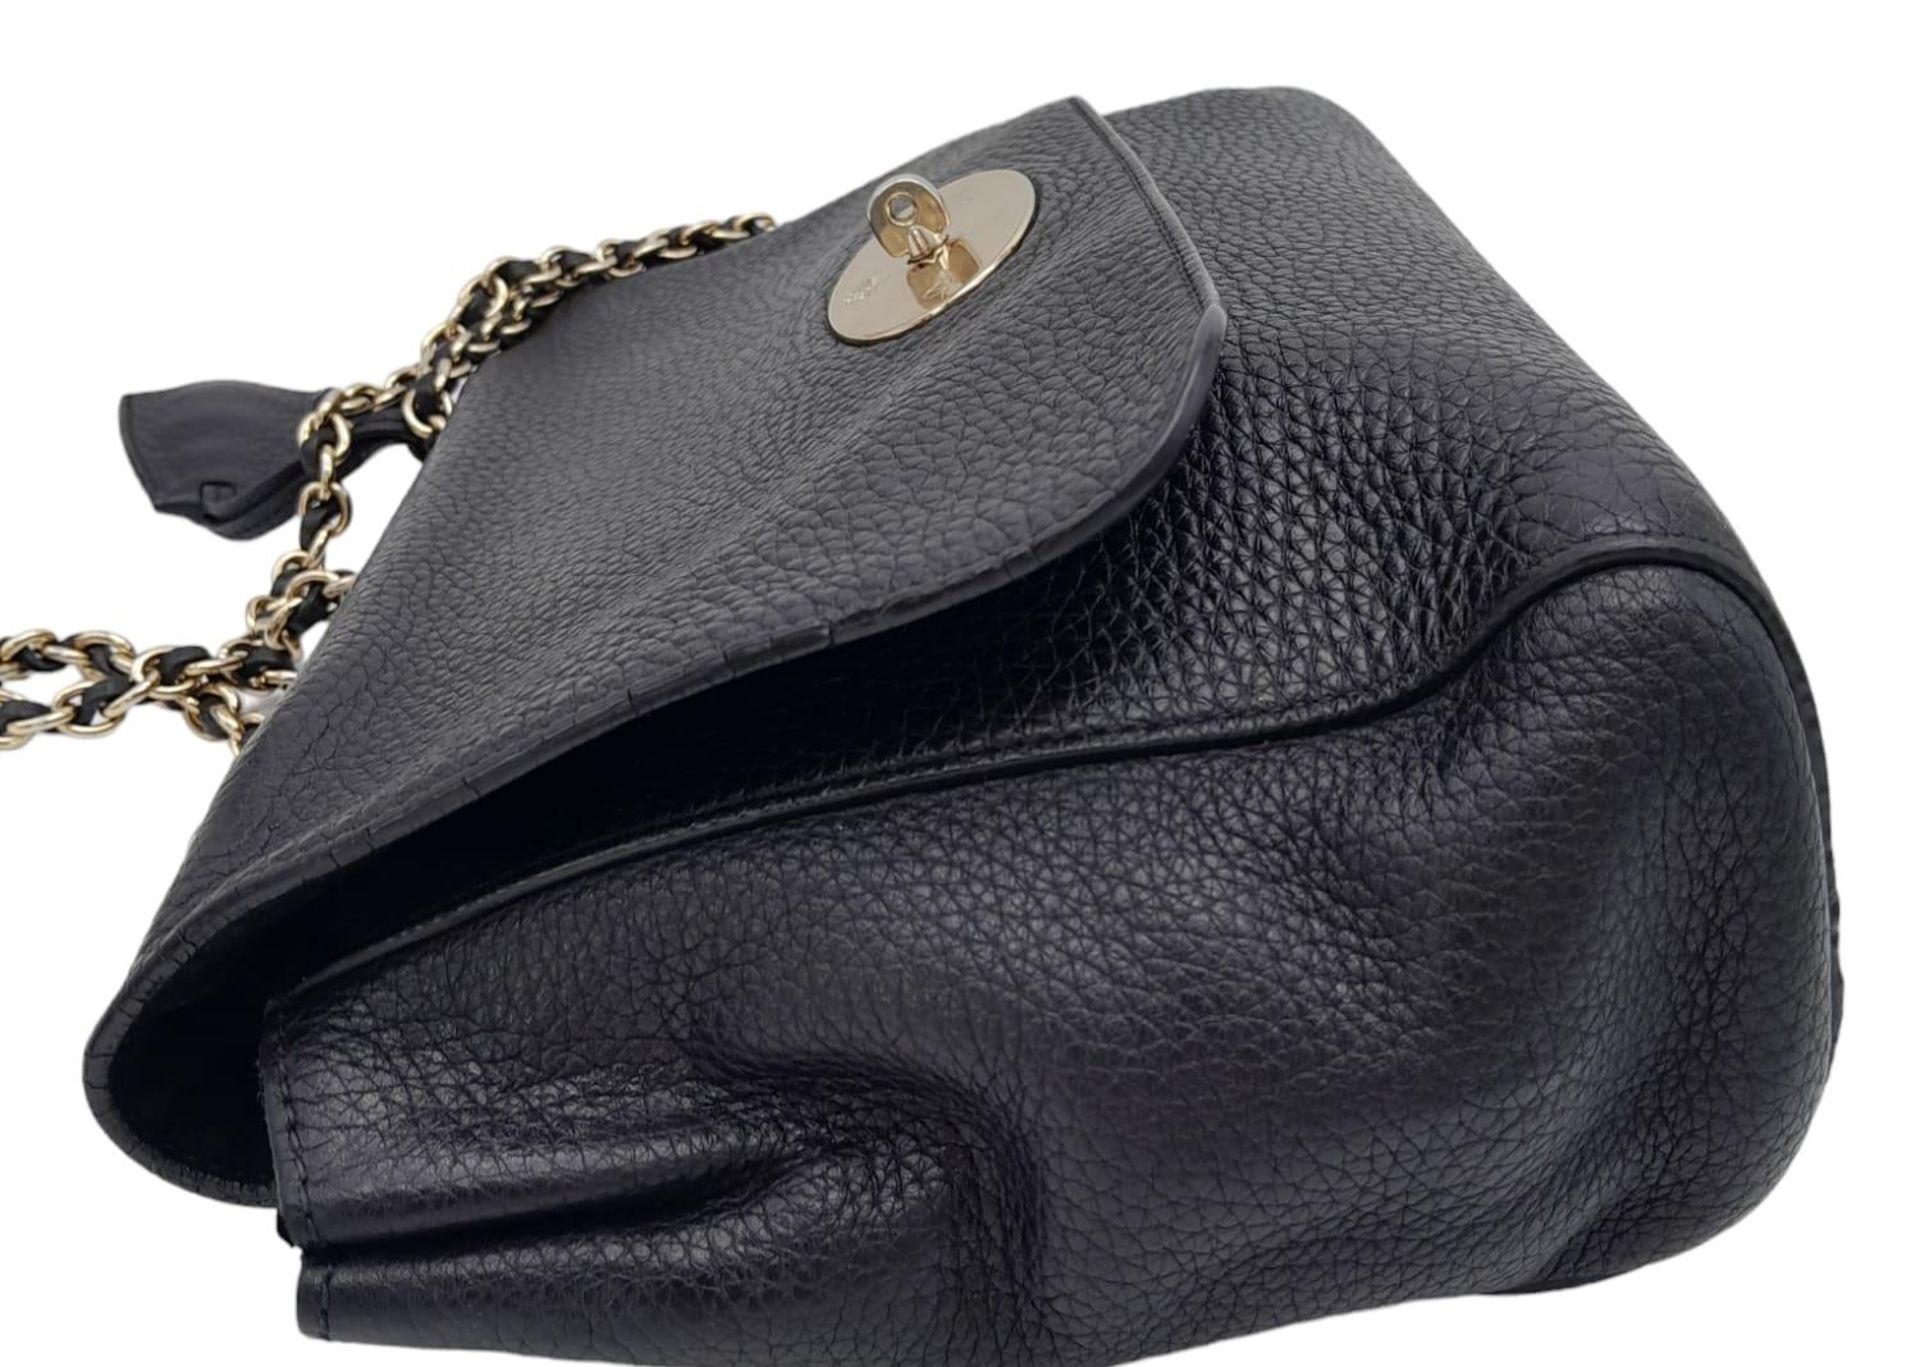 A Black Mulberry Lily Bag. With a Classic Grain Leather, Flap Over Design, Signature Postman Style - Image 3 of 10